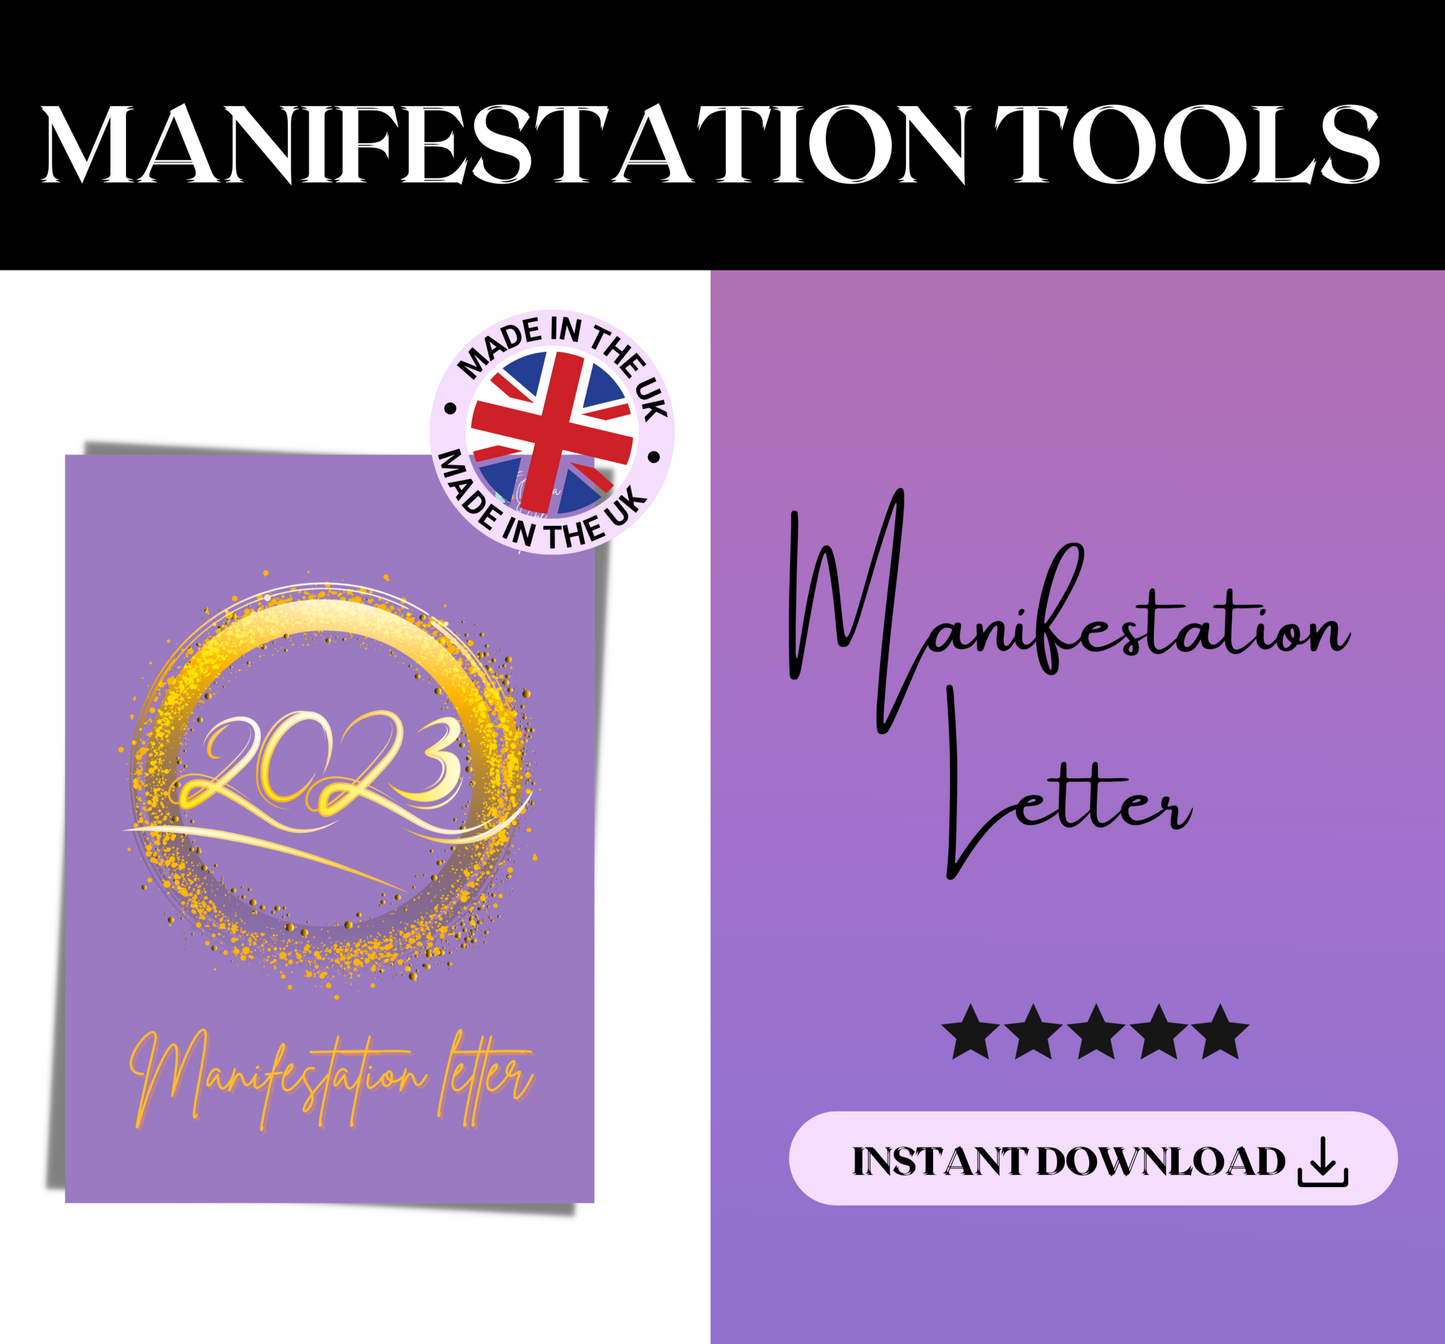 manifestation letter tool features 5 stars feedback, instant download button and made in the UK snippet.